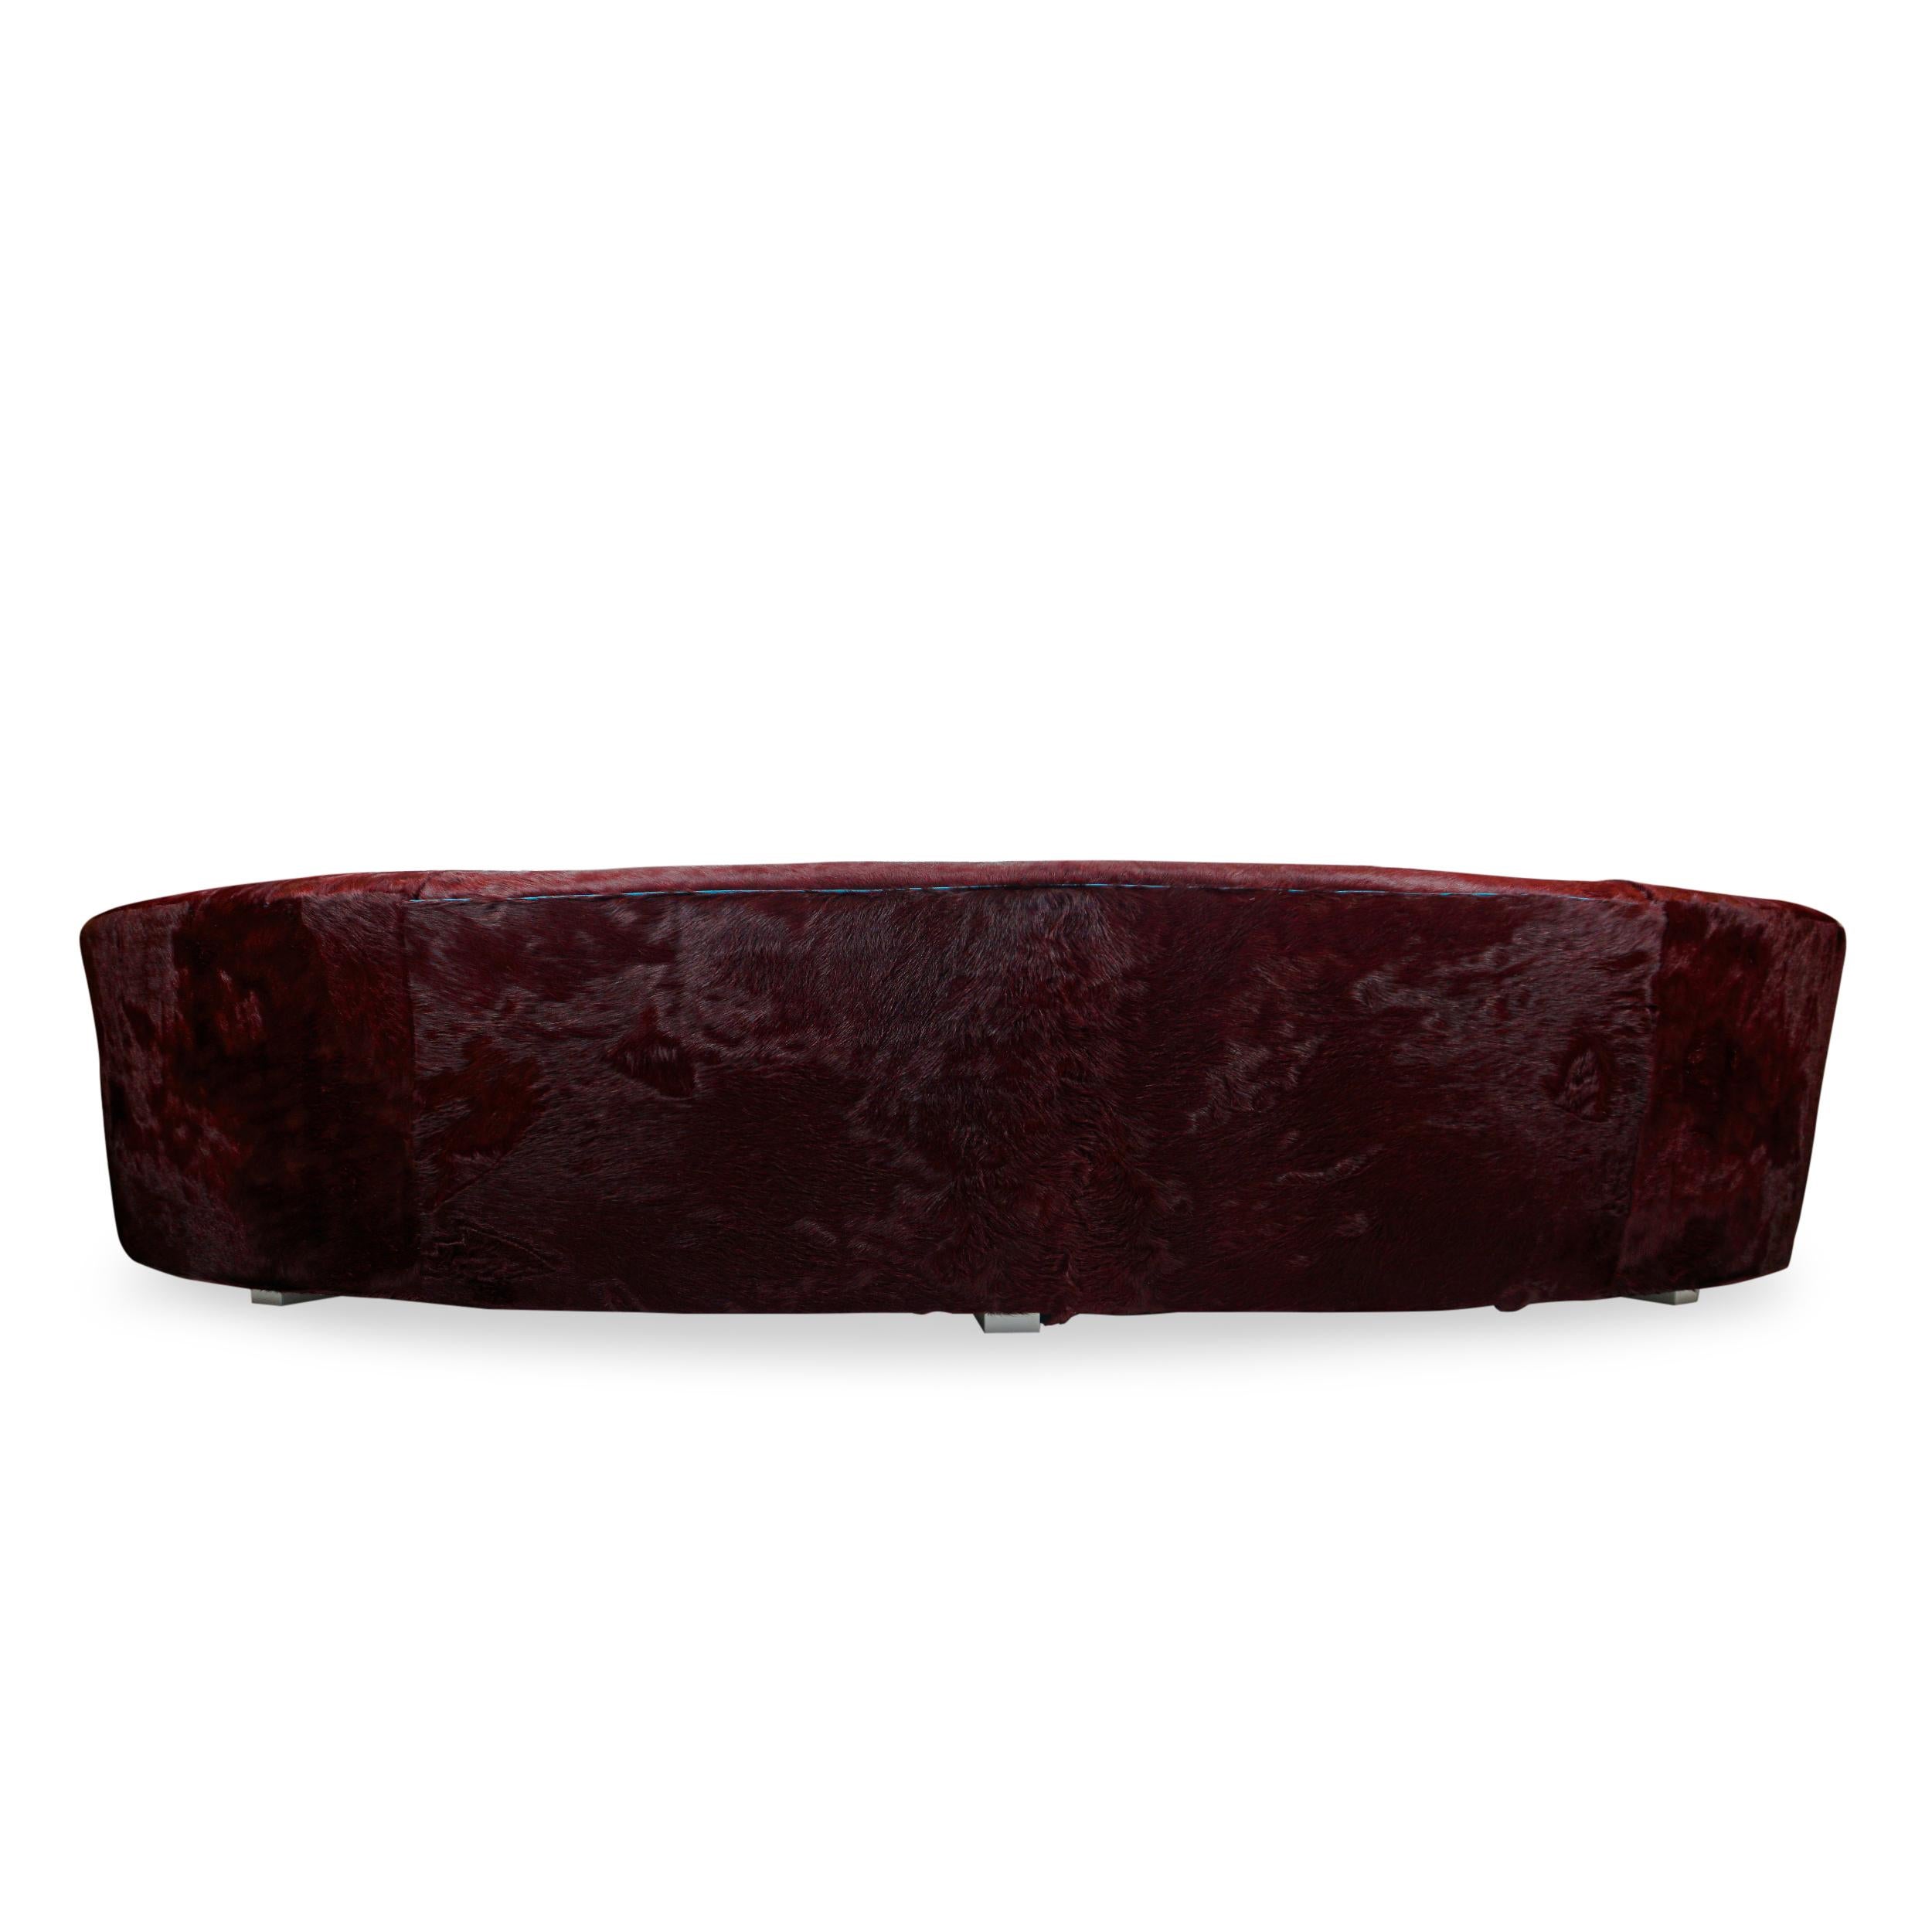 Curved Sofa with Oxblood Cowhide and Fantastical Printed Velvet, Slope Arm For Sale 3